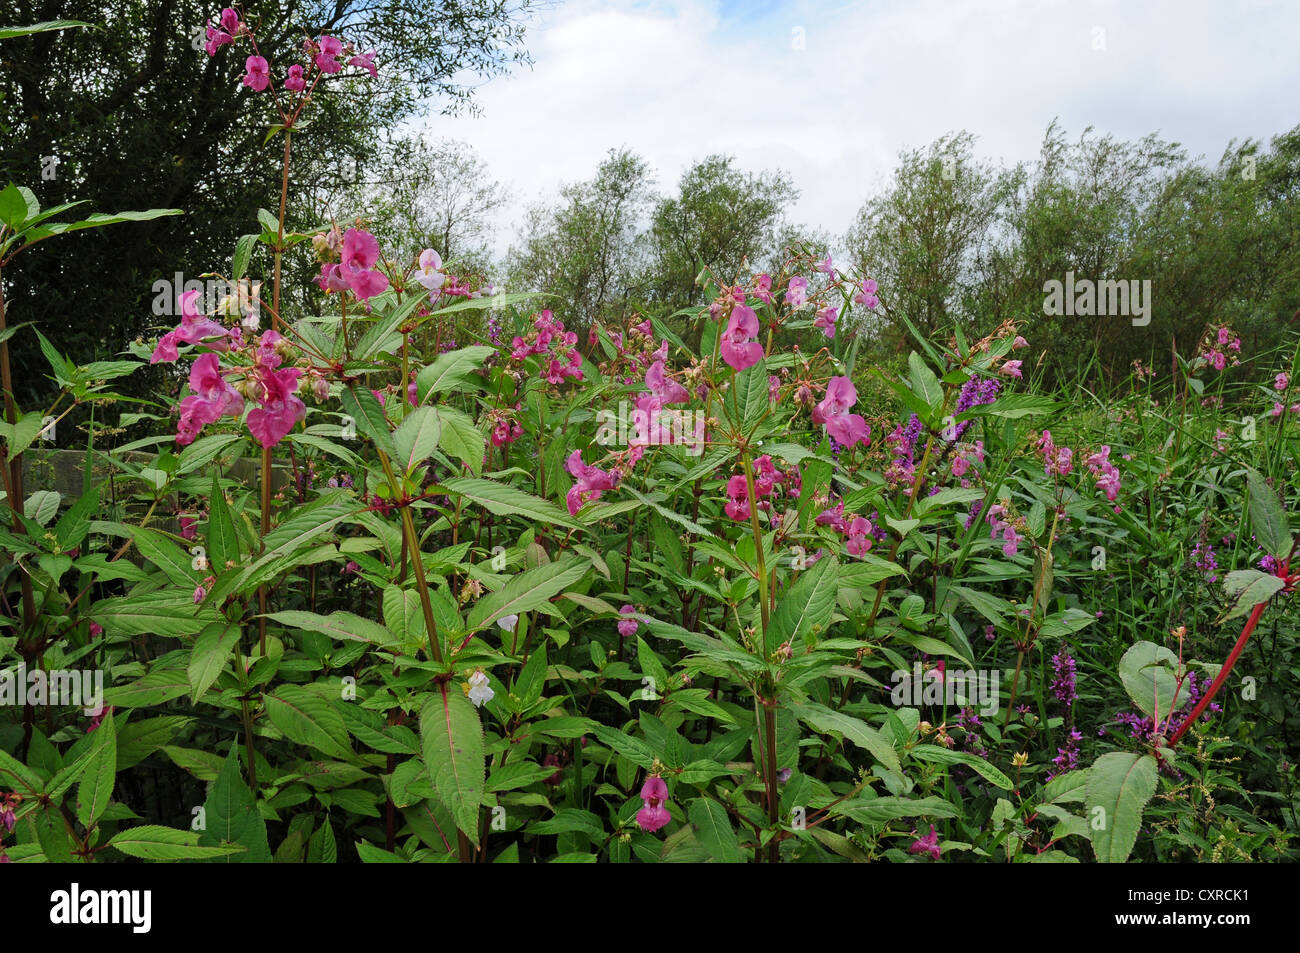 Himalayan balsam Impatiens glandulifera  growing on the banks of the River Arun. Stock Photo